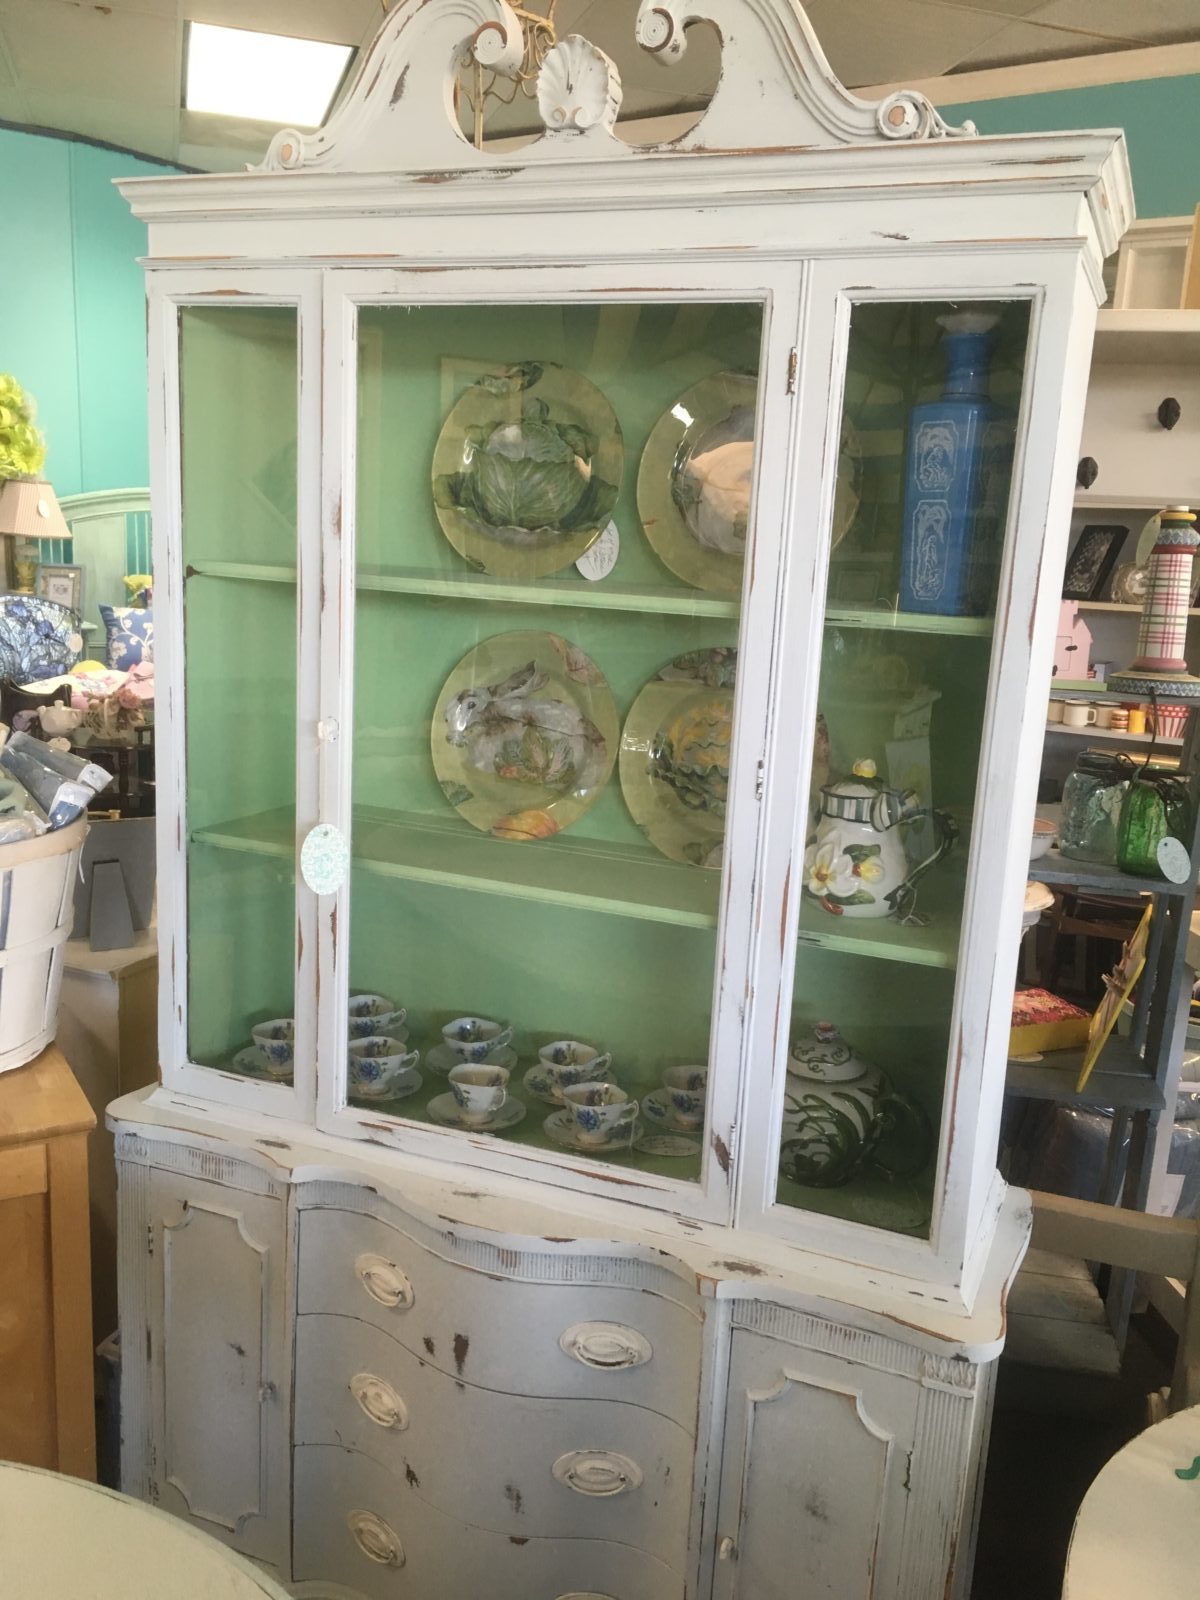 Chalk Paint China Cabinet • Antique china cabinet in a faint blue chalk paint with a pleasing green interior to showcase your china or favorite ceramics. Features an ornate scroll top, plate grooves and storage underneath for silverware & napkins.